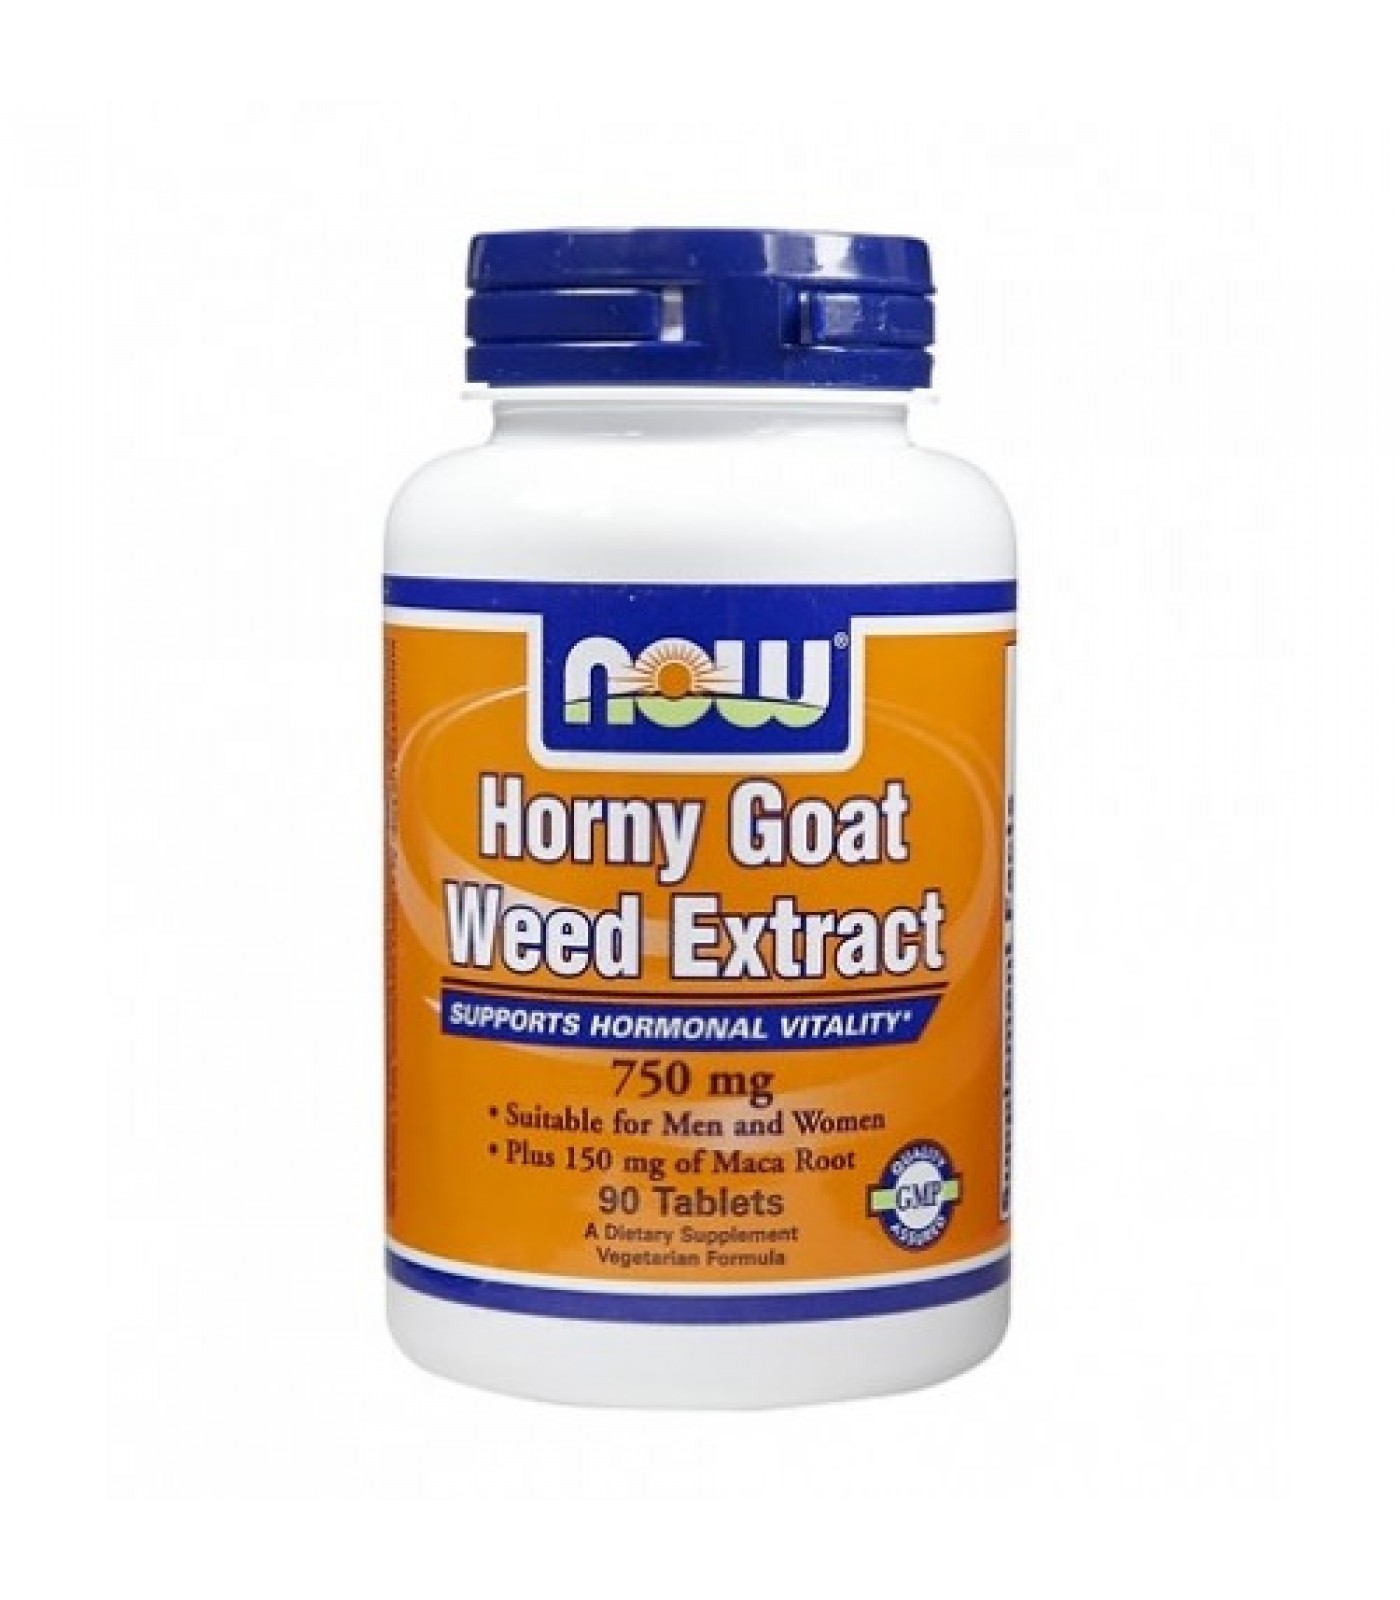 NOW - Horny Goat Weed Extract 750mg. / 90 Tabs.